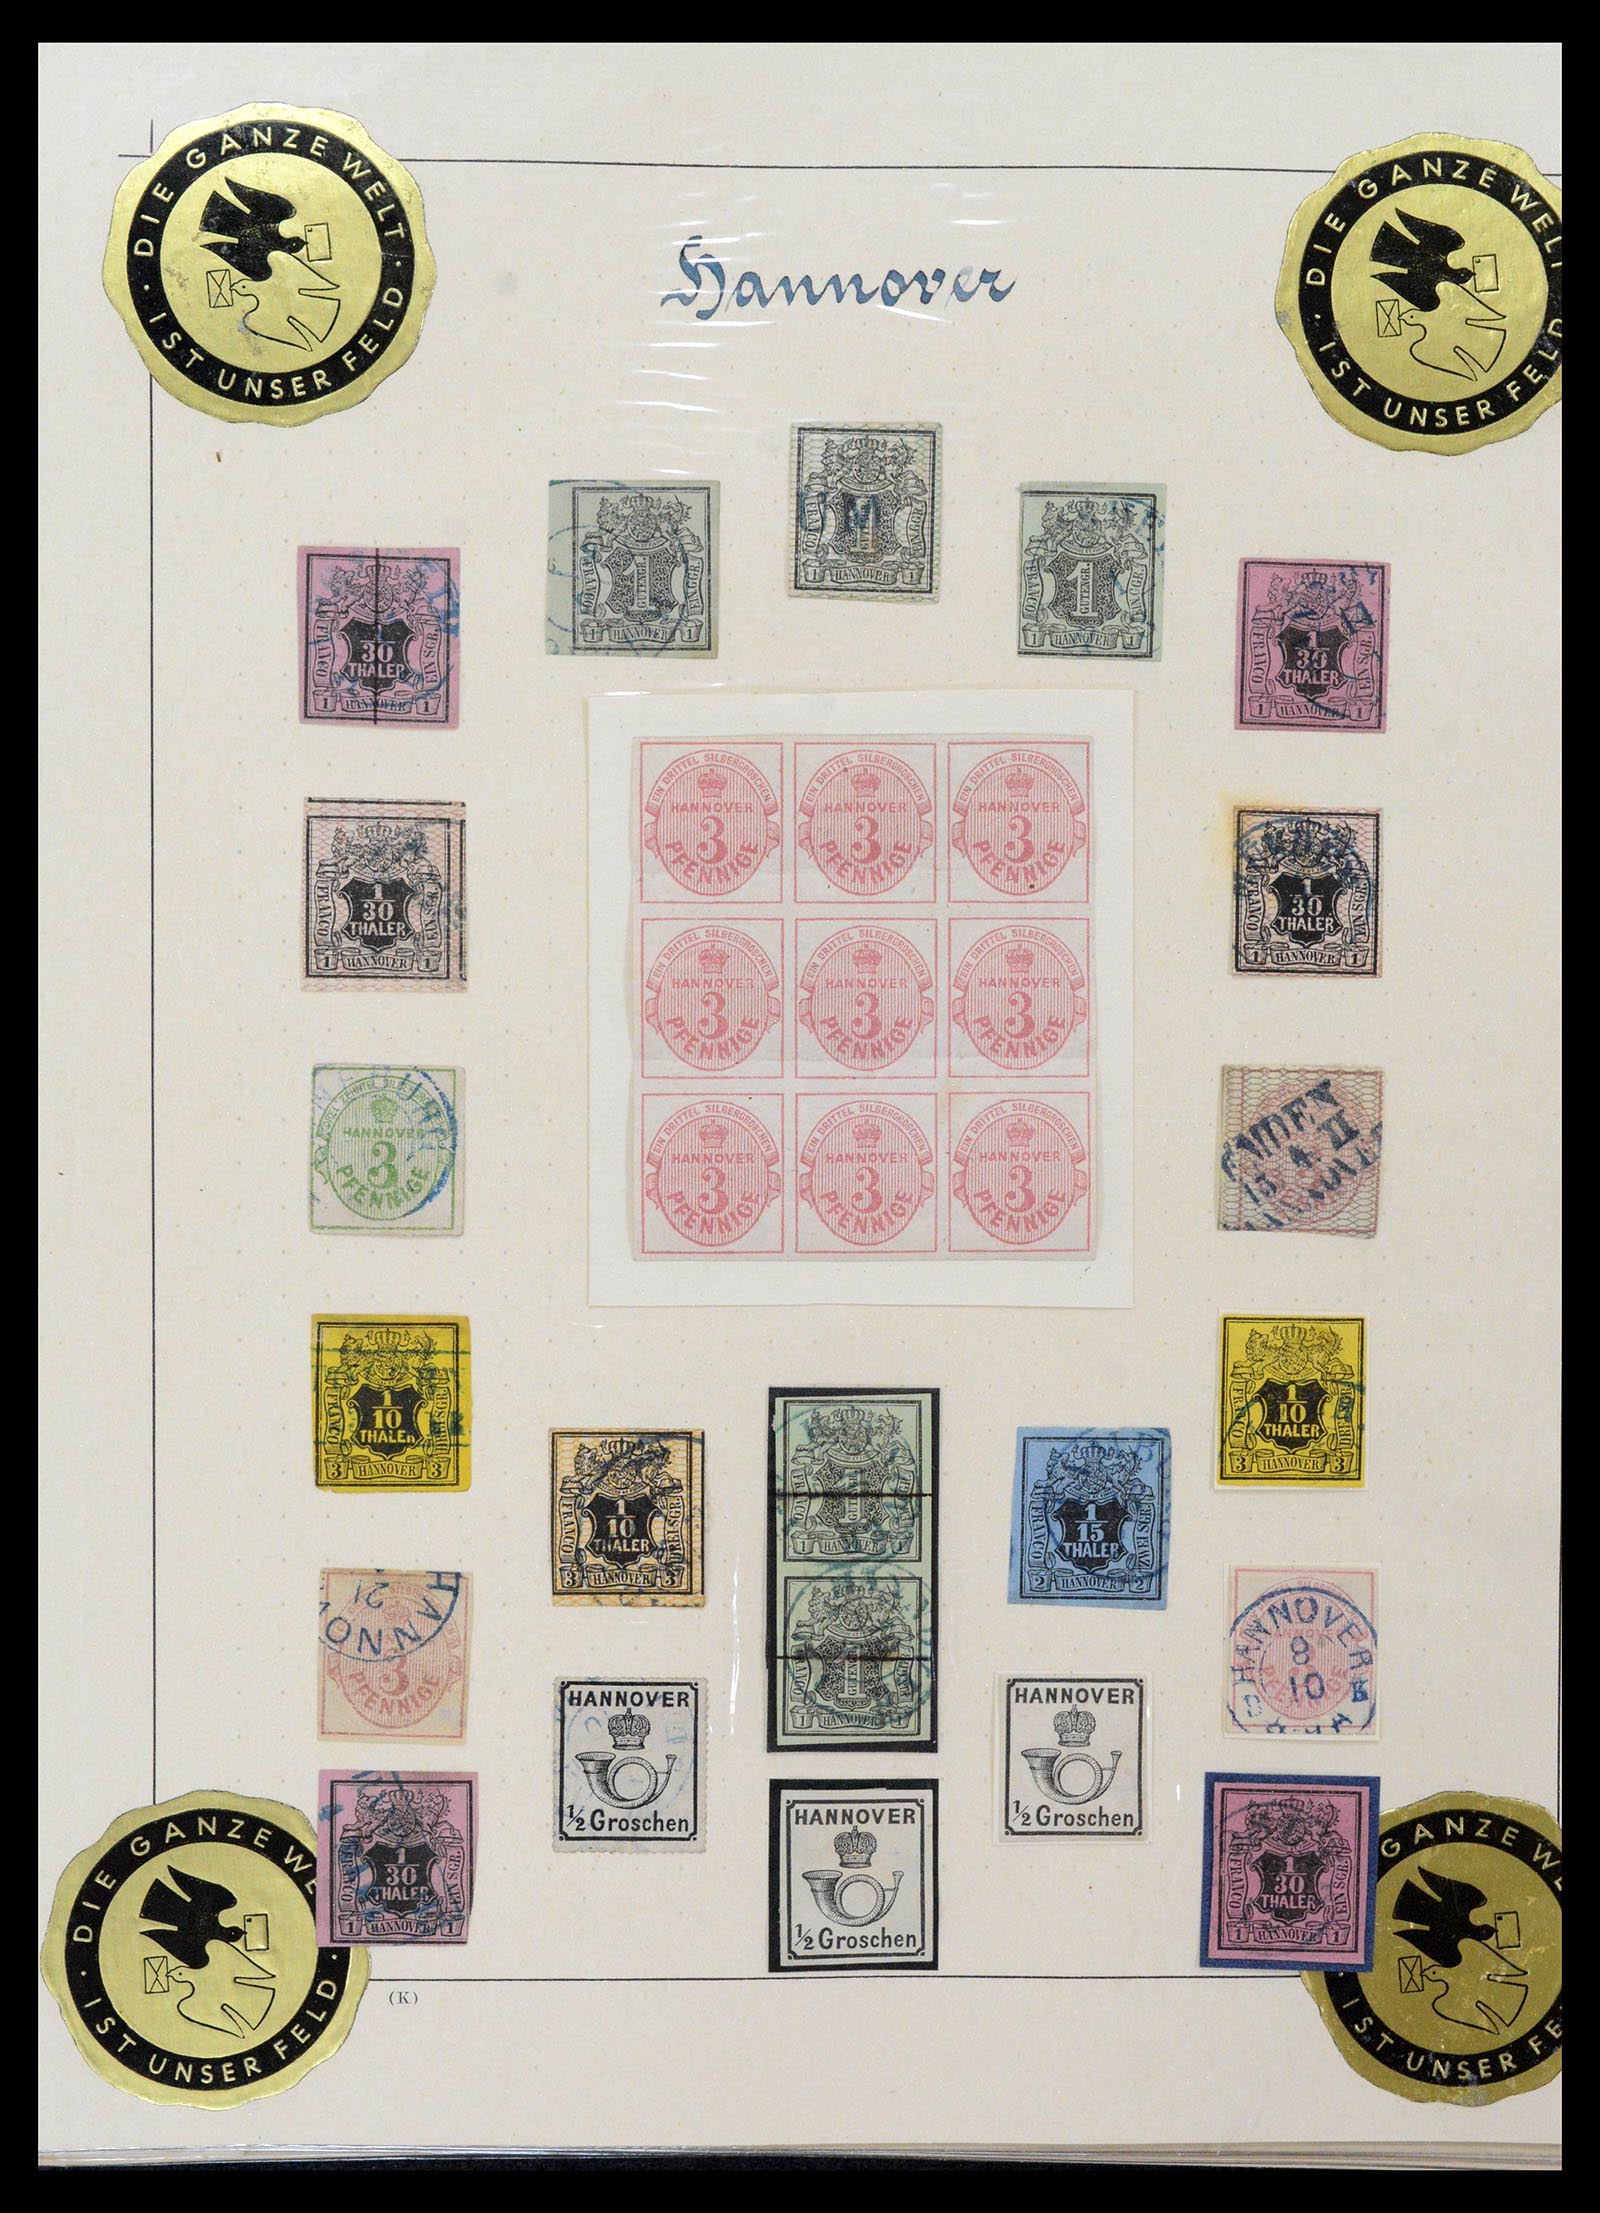 39200 0021 - Stamp collection 39200 Hannover SUPER collection 1850-1864.